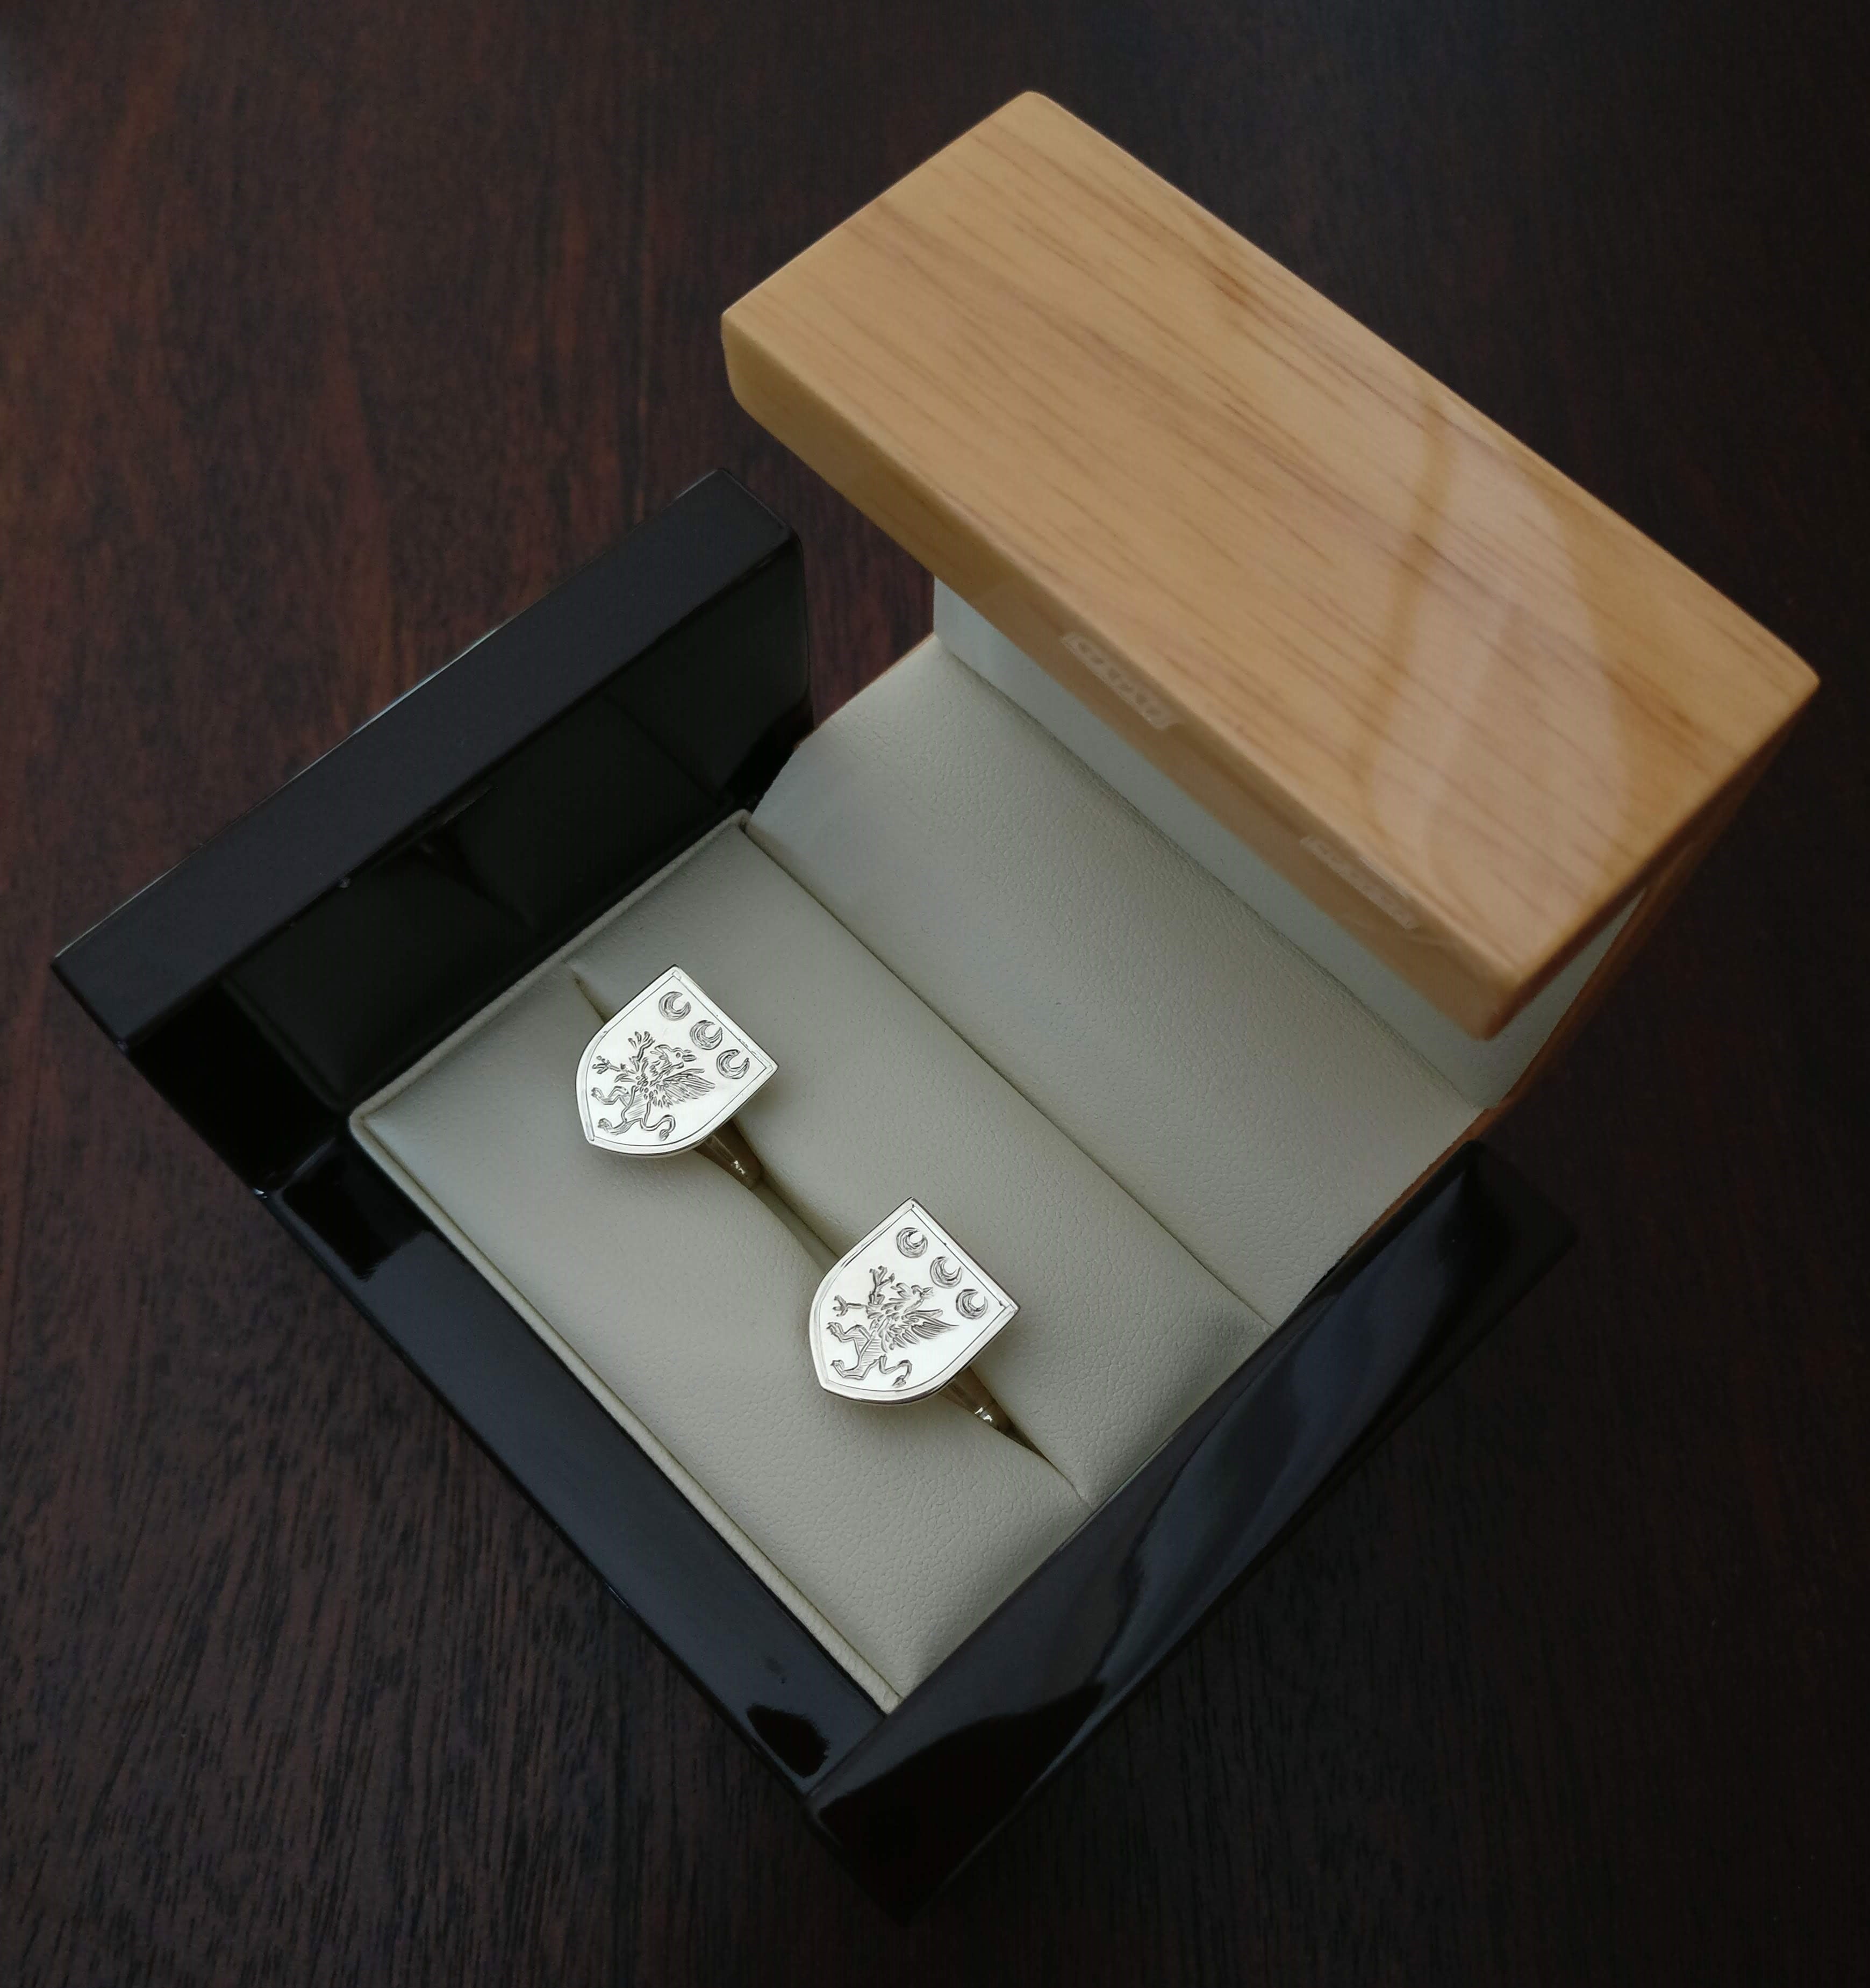 Select Gifts Milligan Ireland Family Crest Surname Coat Of Arms Gold Cufflinks Engraved Box 